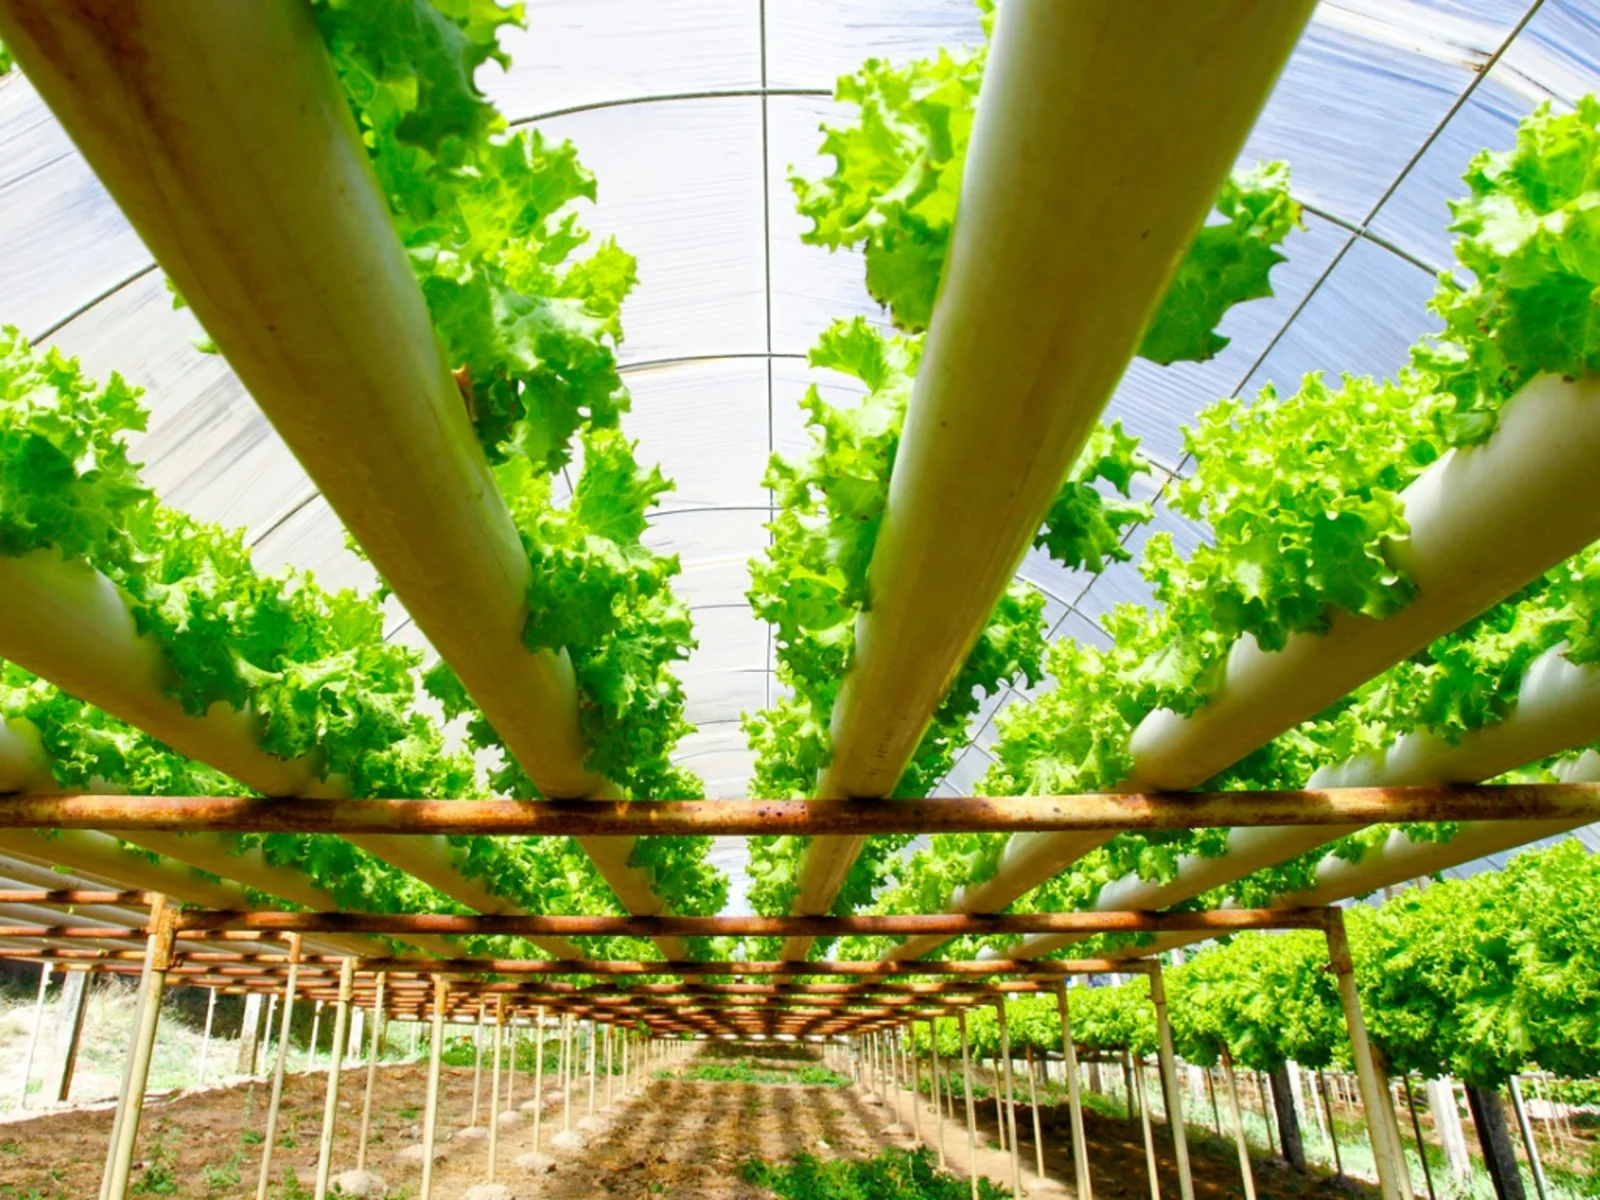 How Do You Believe Hydroponics Can Help Future Demands For Food Production?